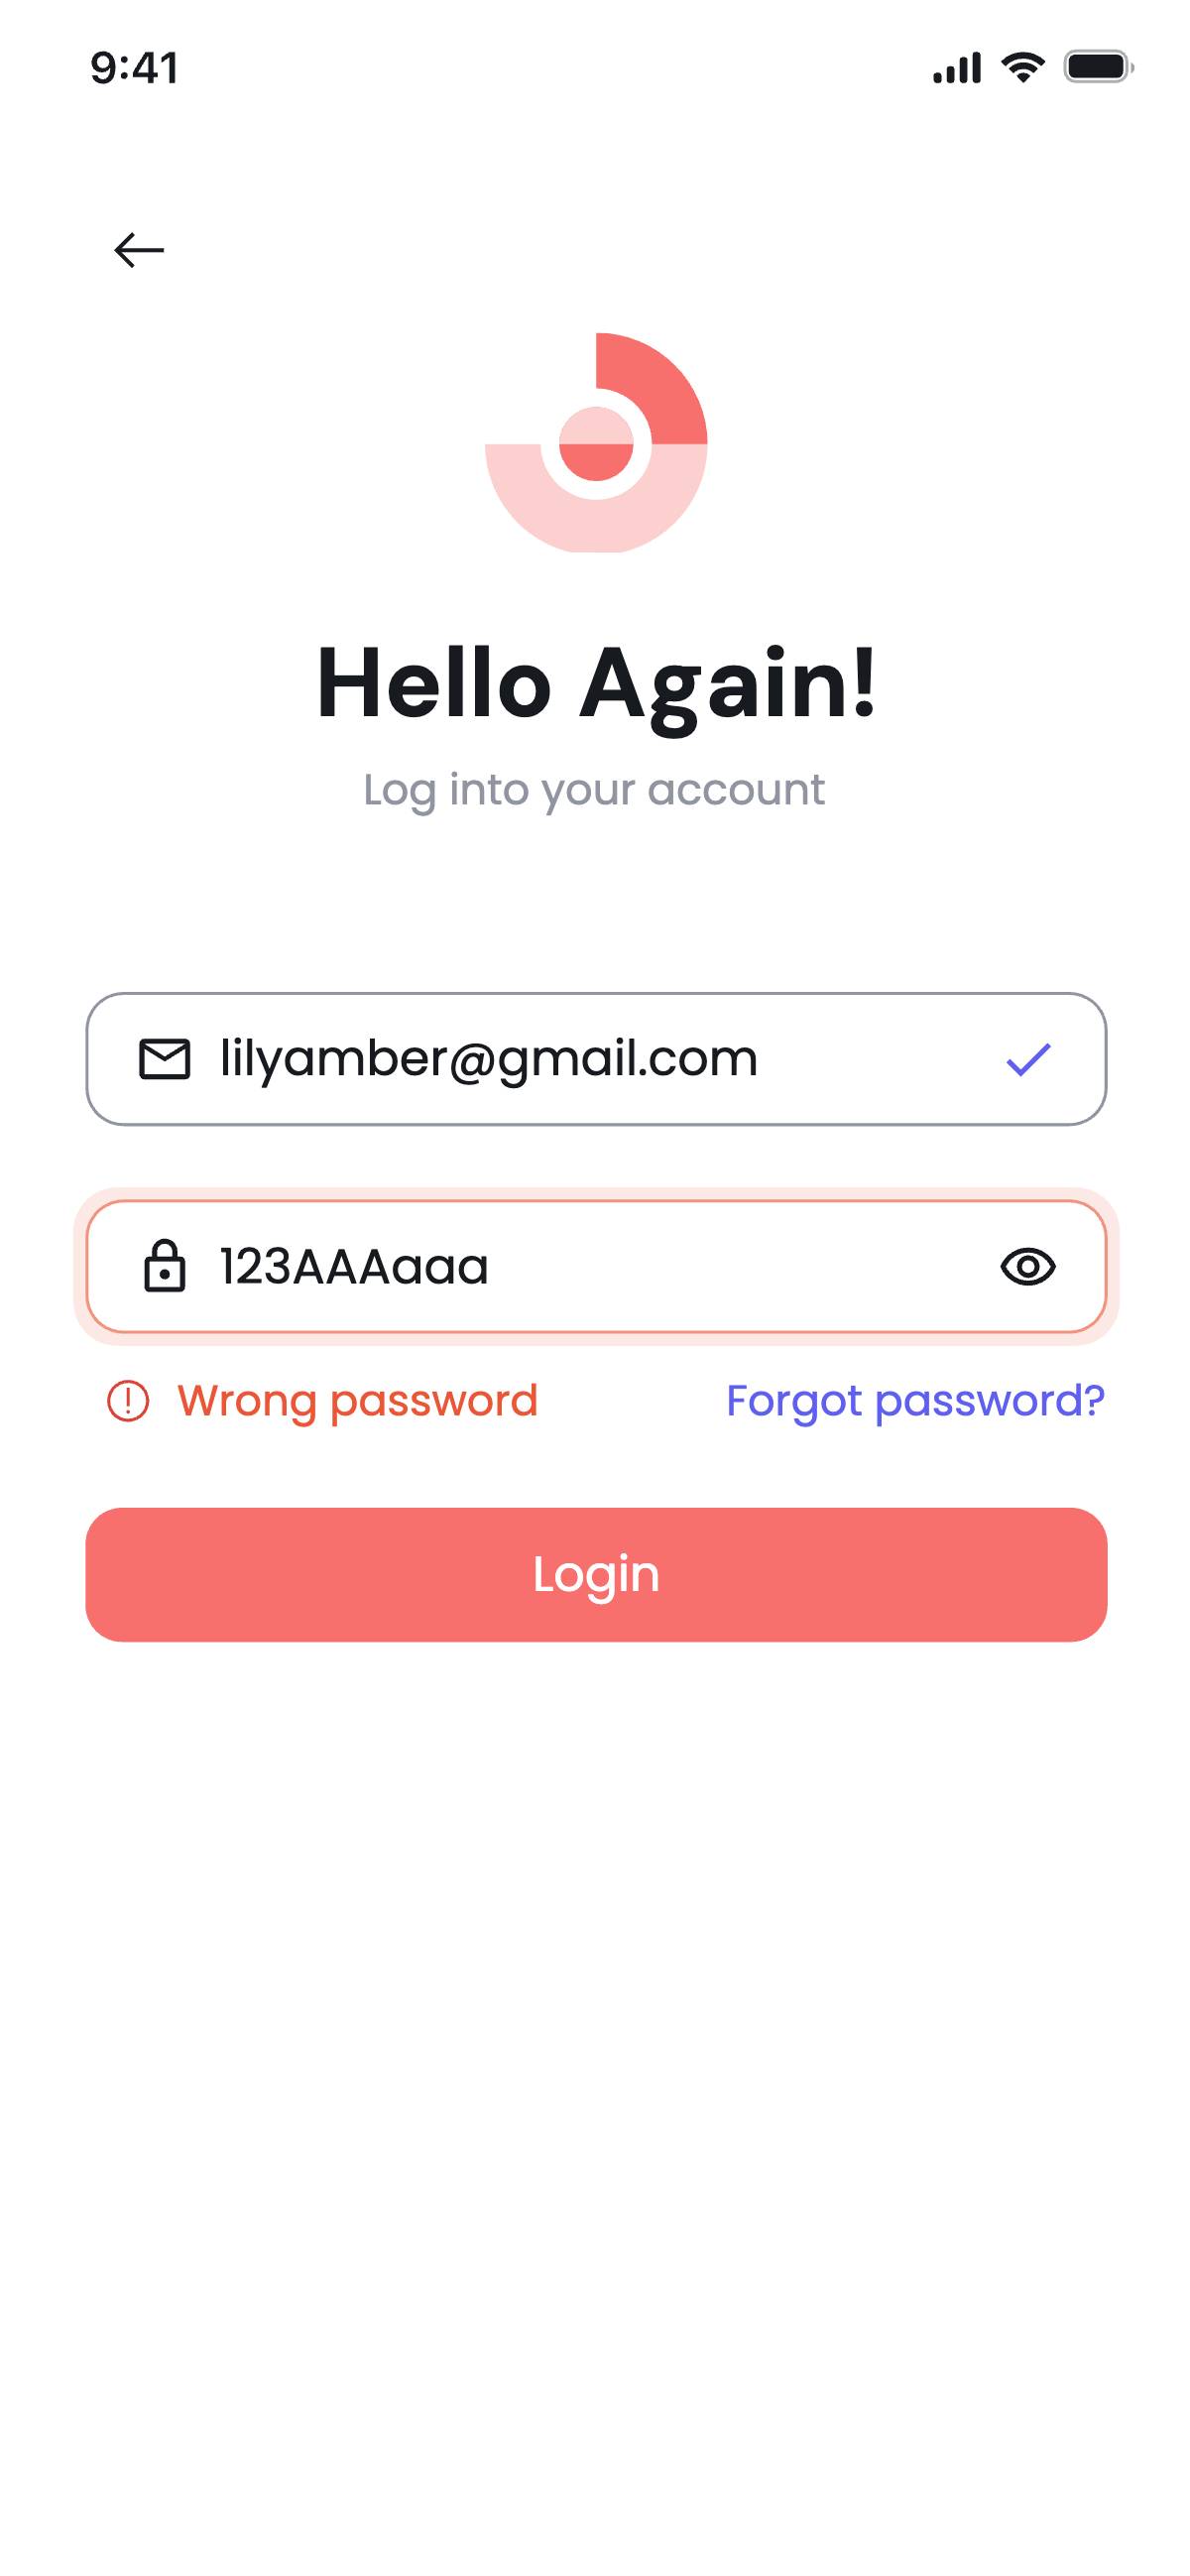 Sign in with email - Wrong password